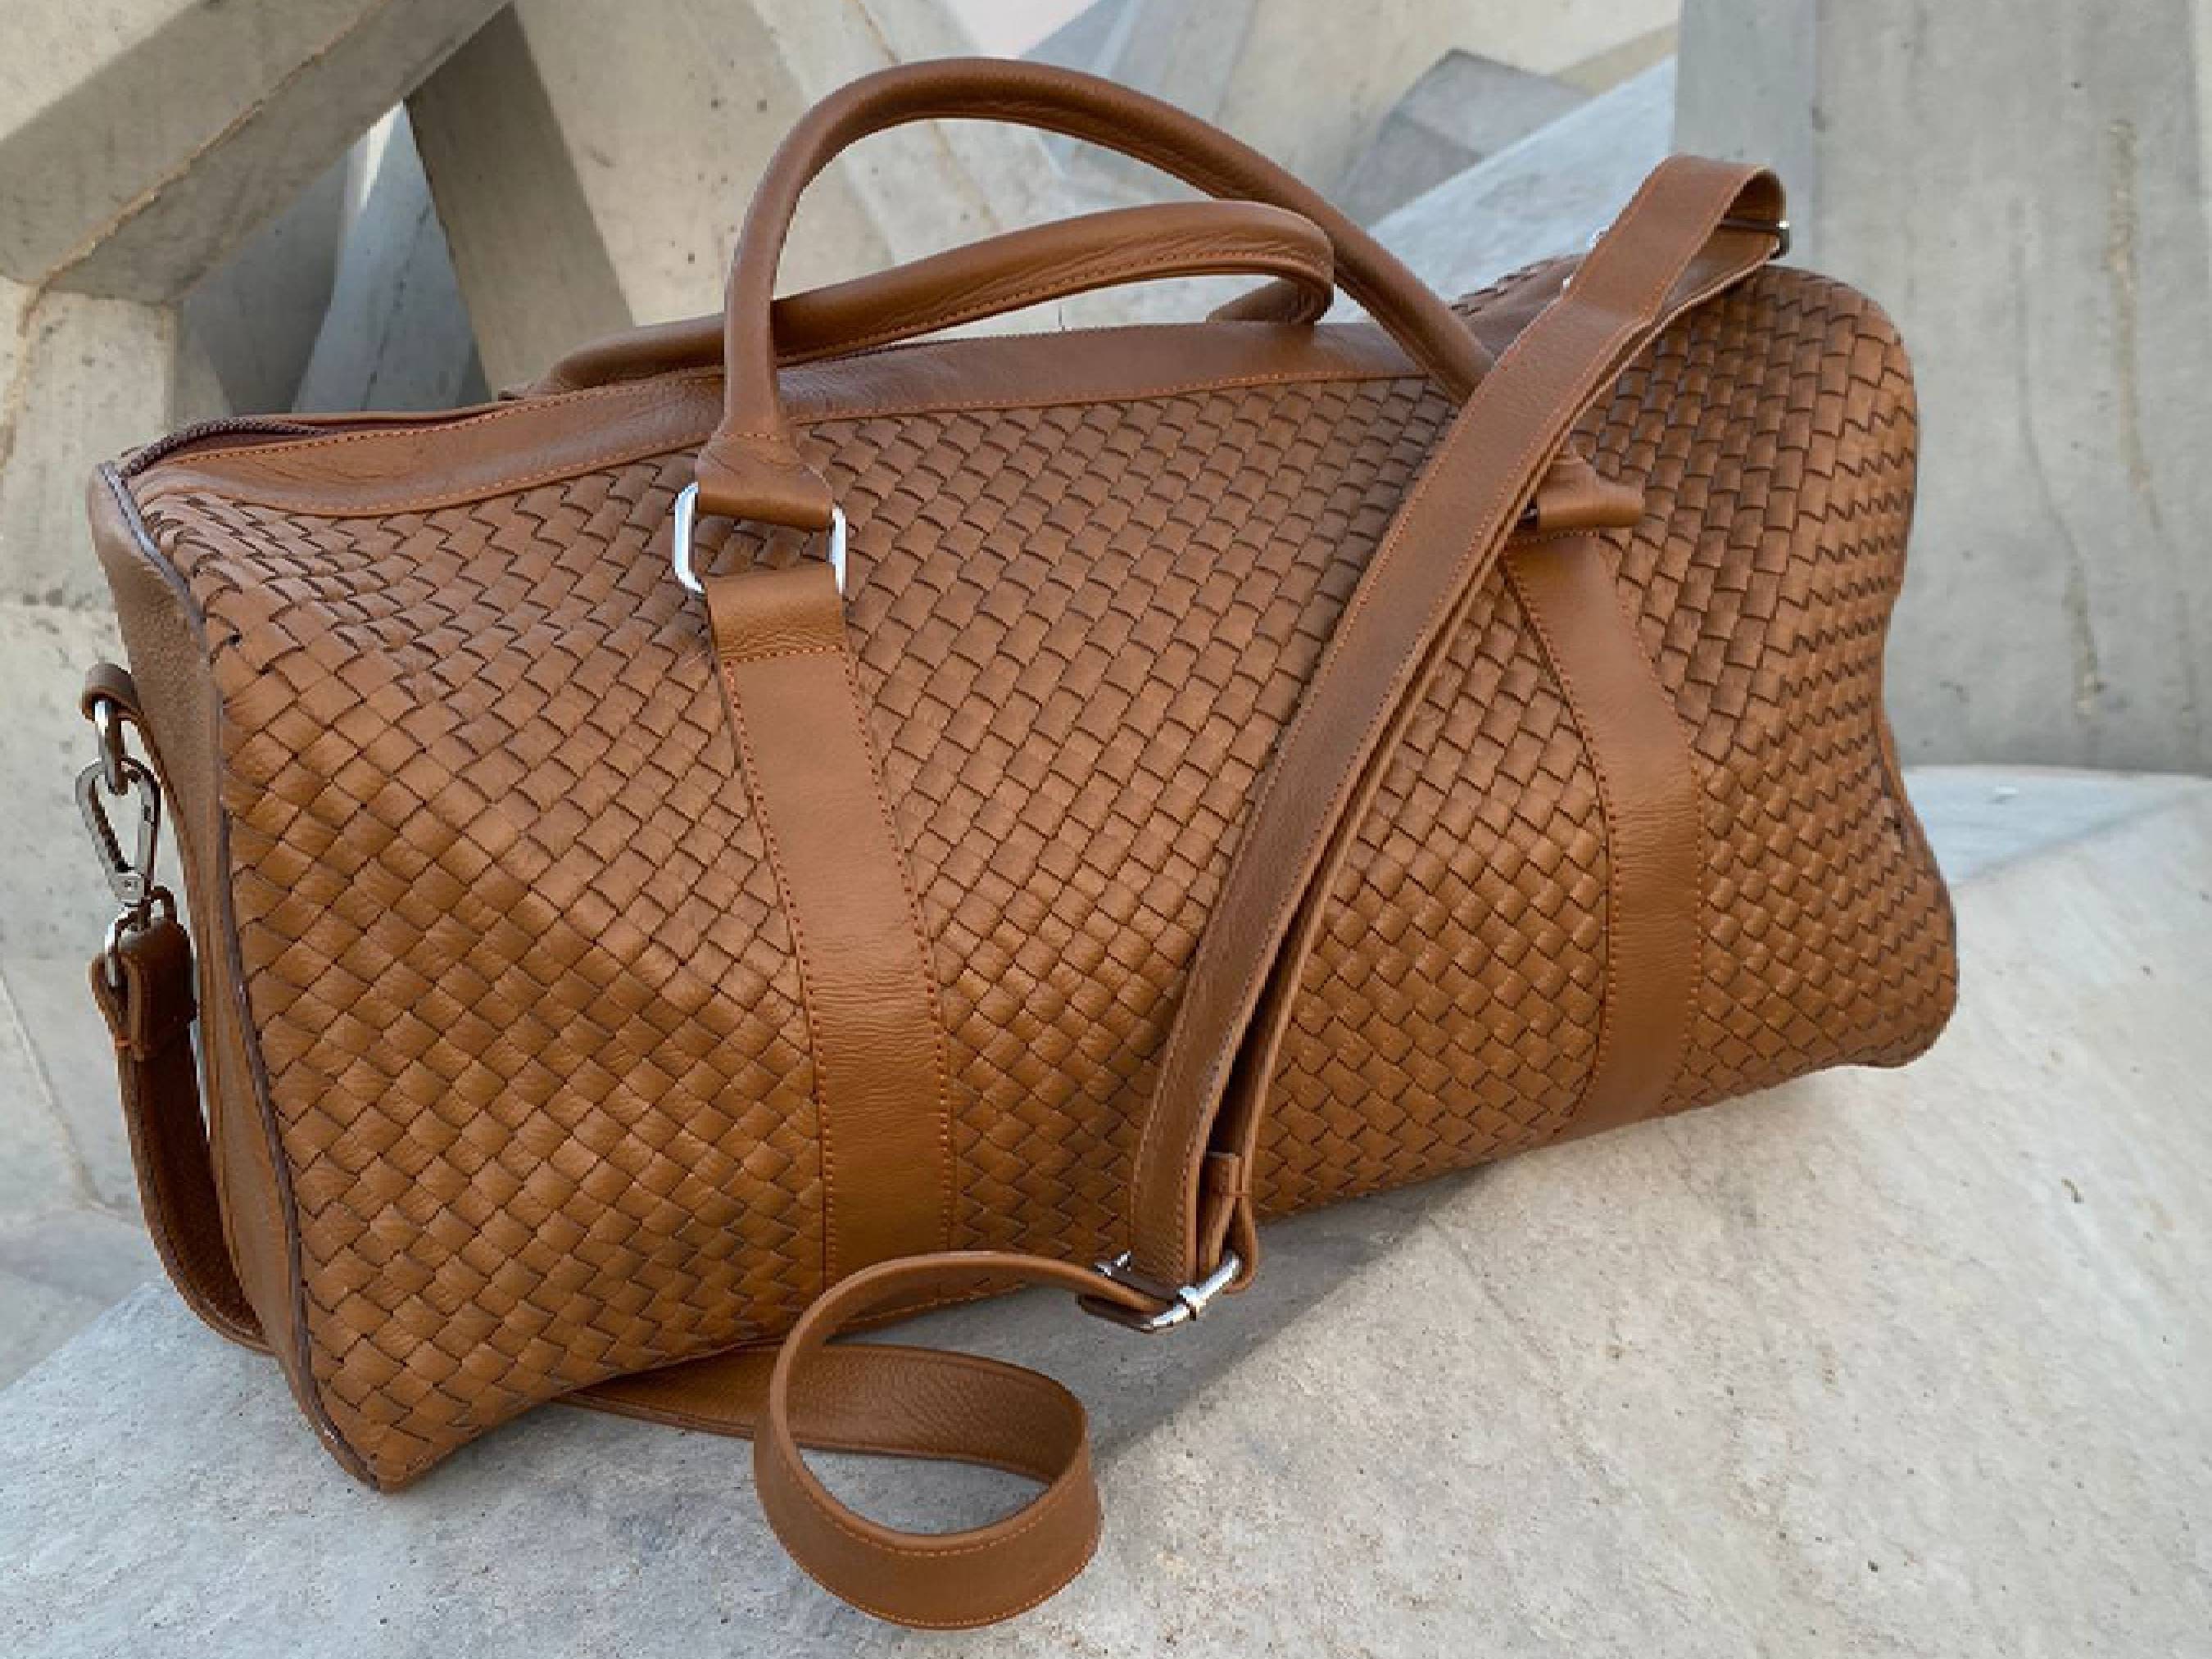 Leather Duffel Bag Handwoven Luxury Travel Bag Personalized 